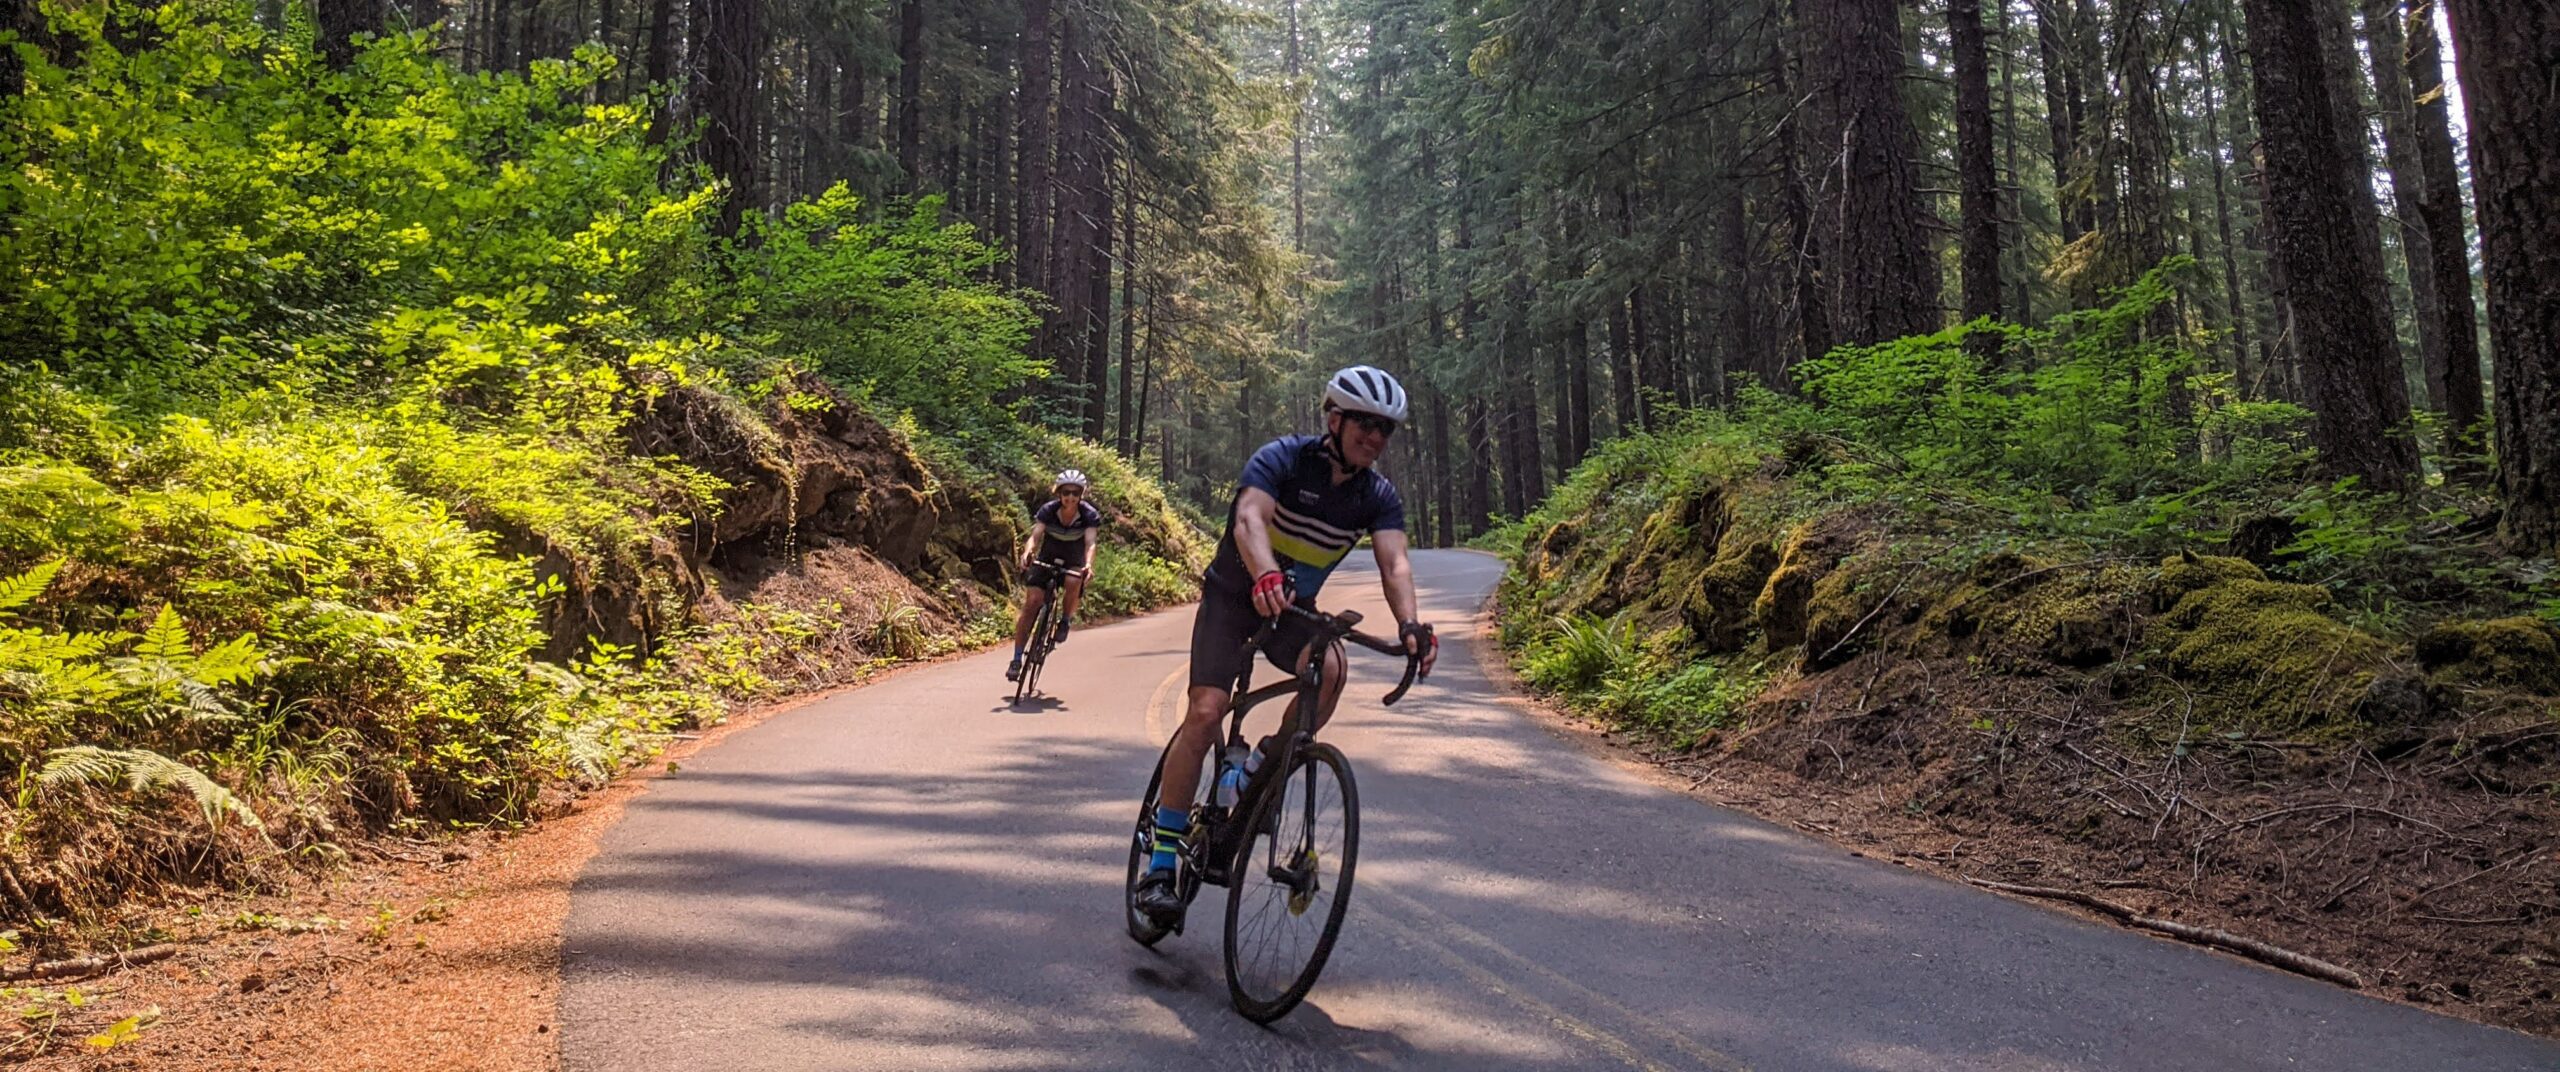 two people riding their bikes on a paved road through Oregon trees